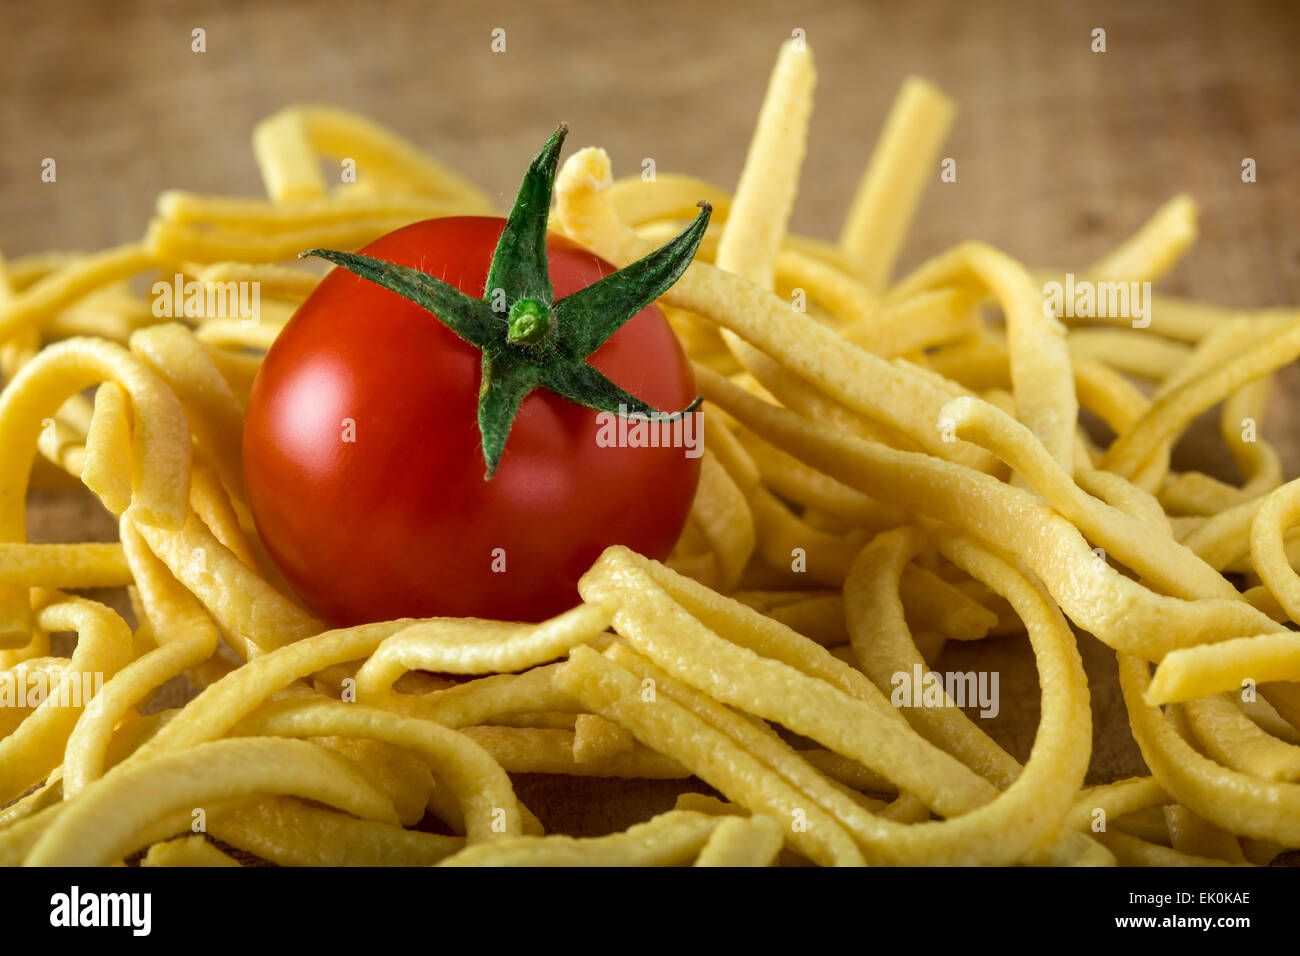 Tomato and noodles over old wood background Stock Photo